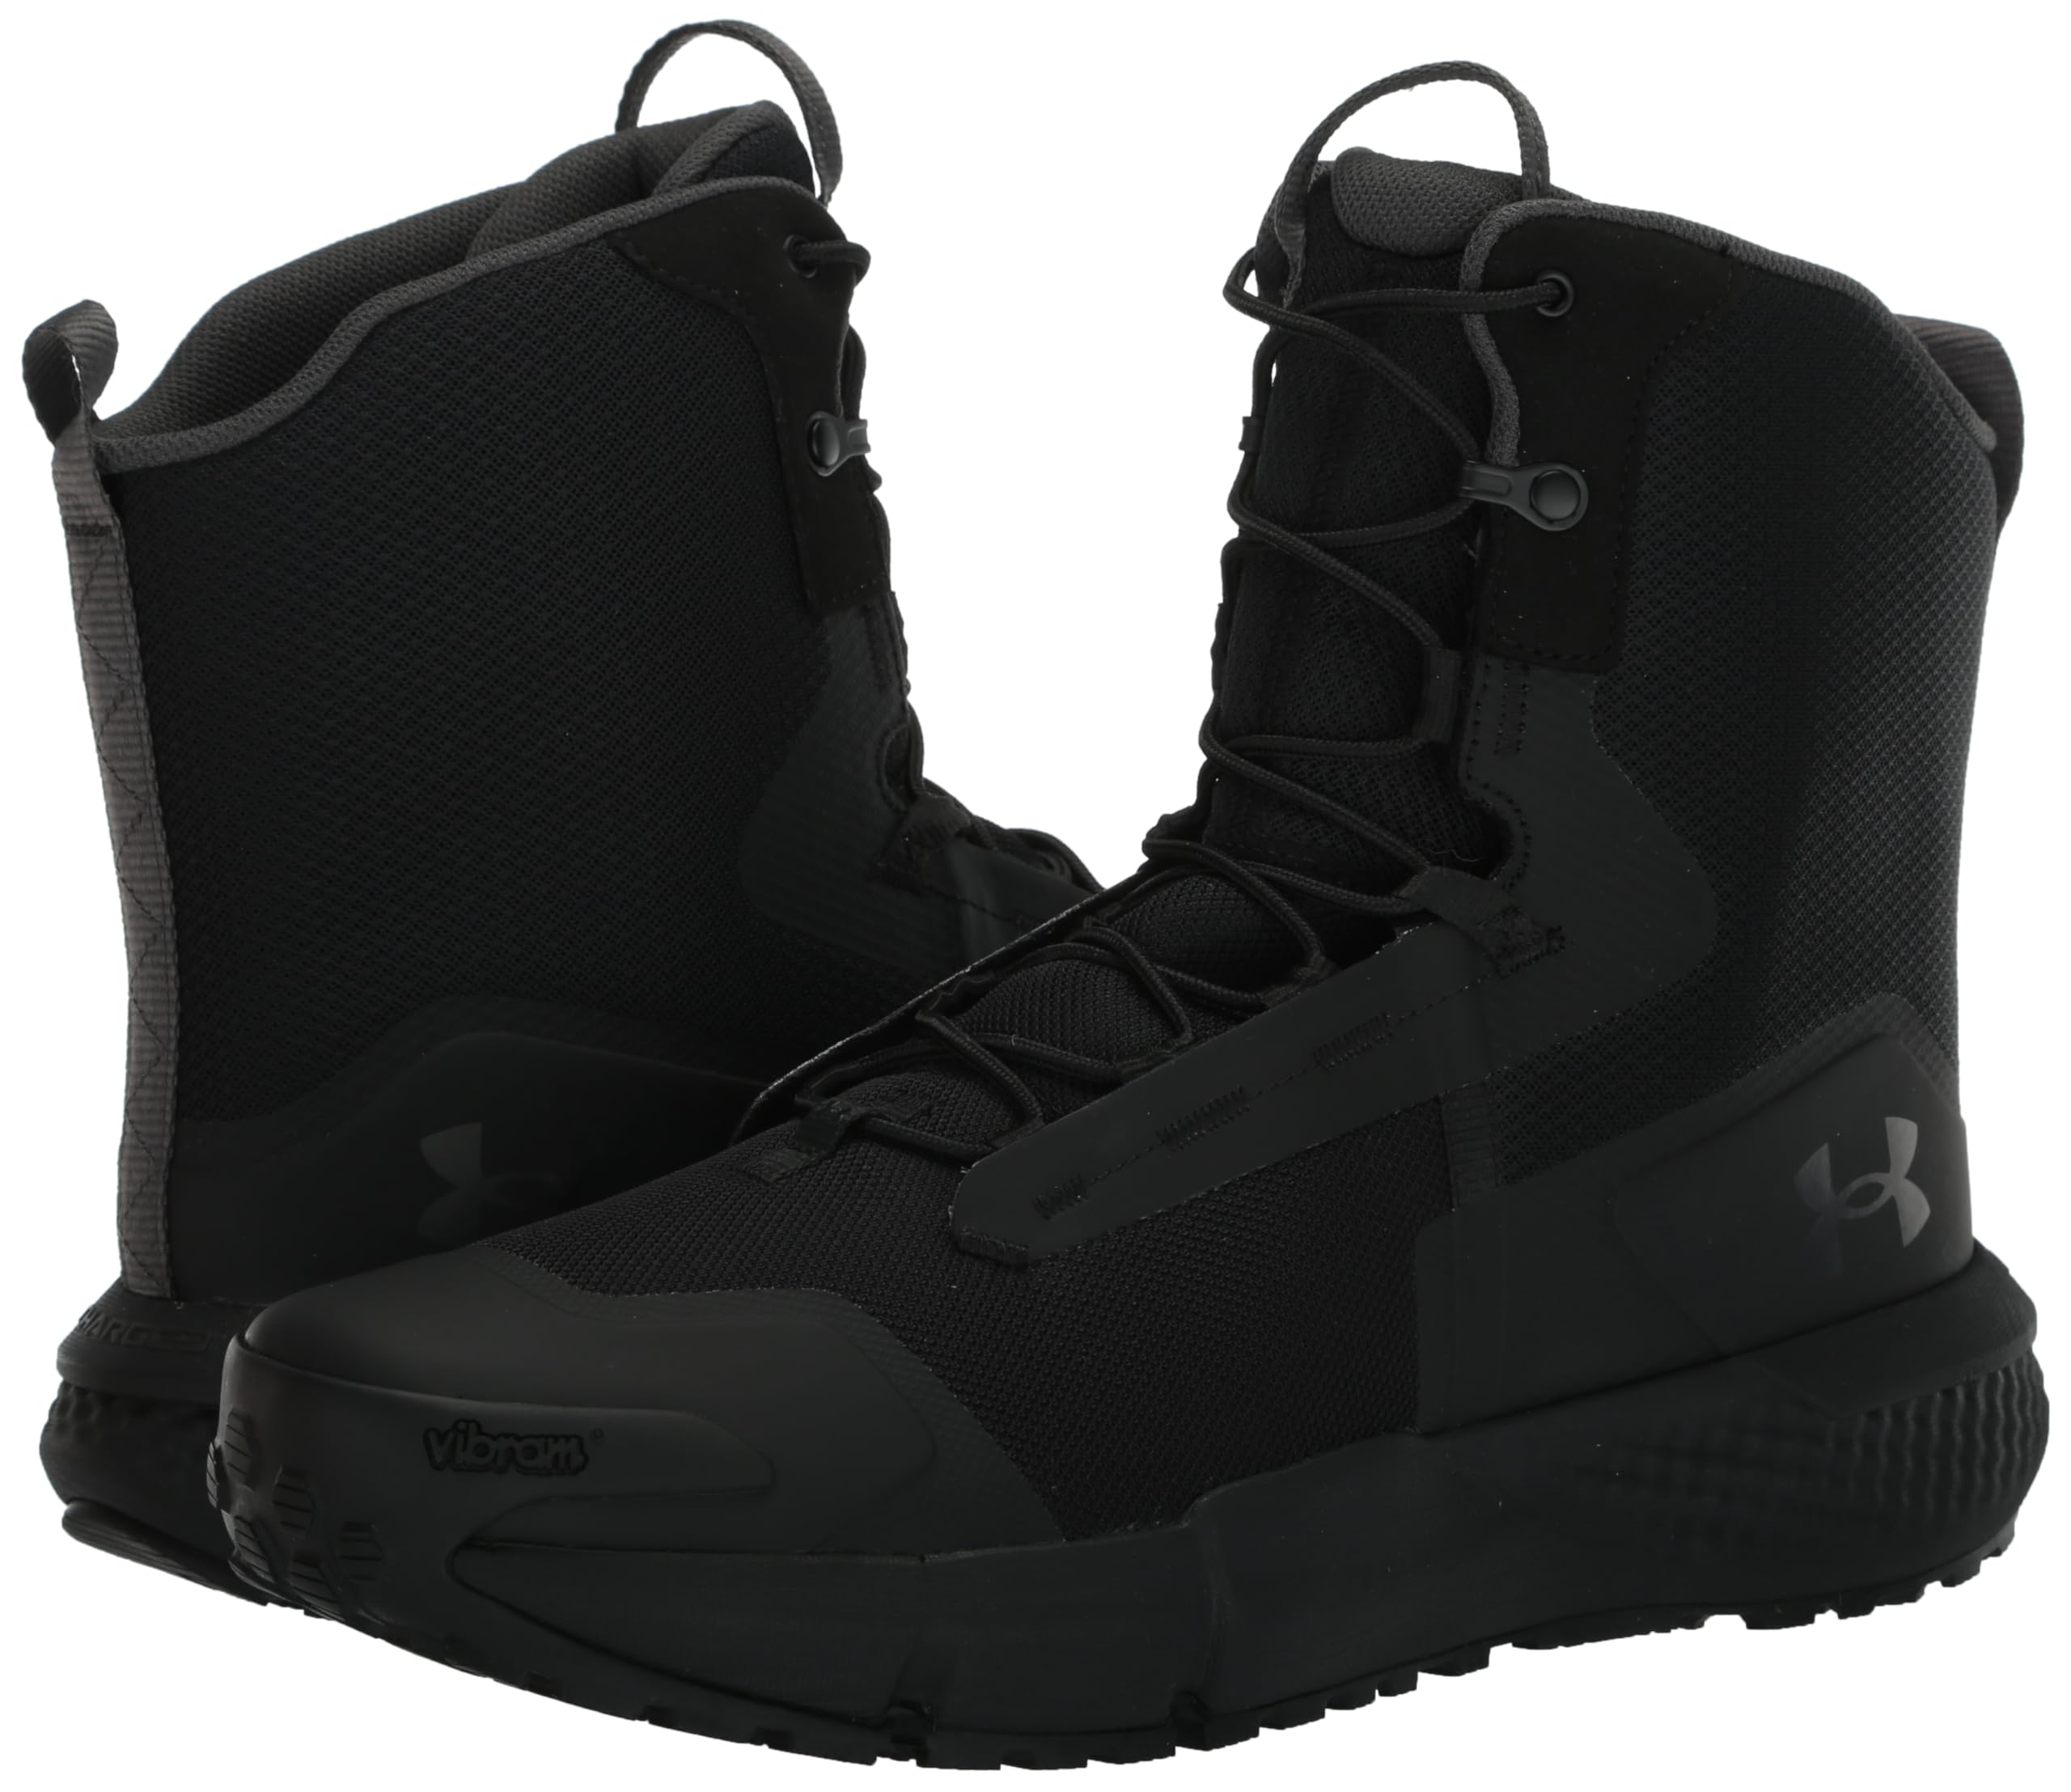 Under Armour Men's Charged Valsetz Military and Tactical Boot